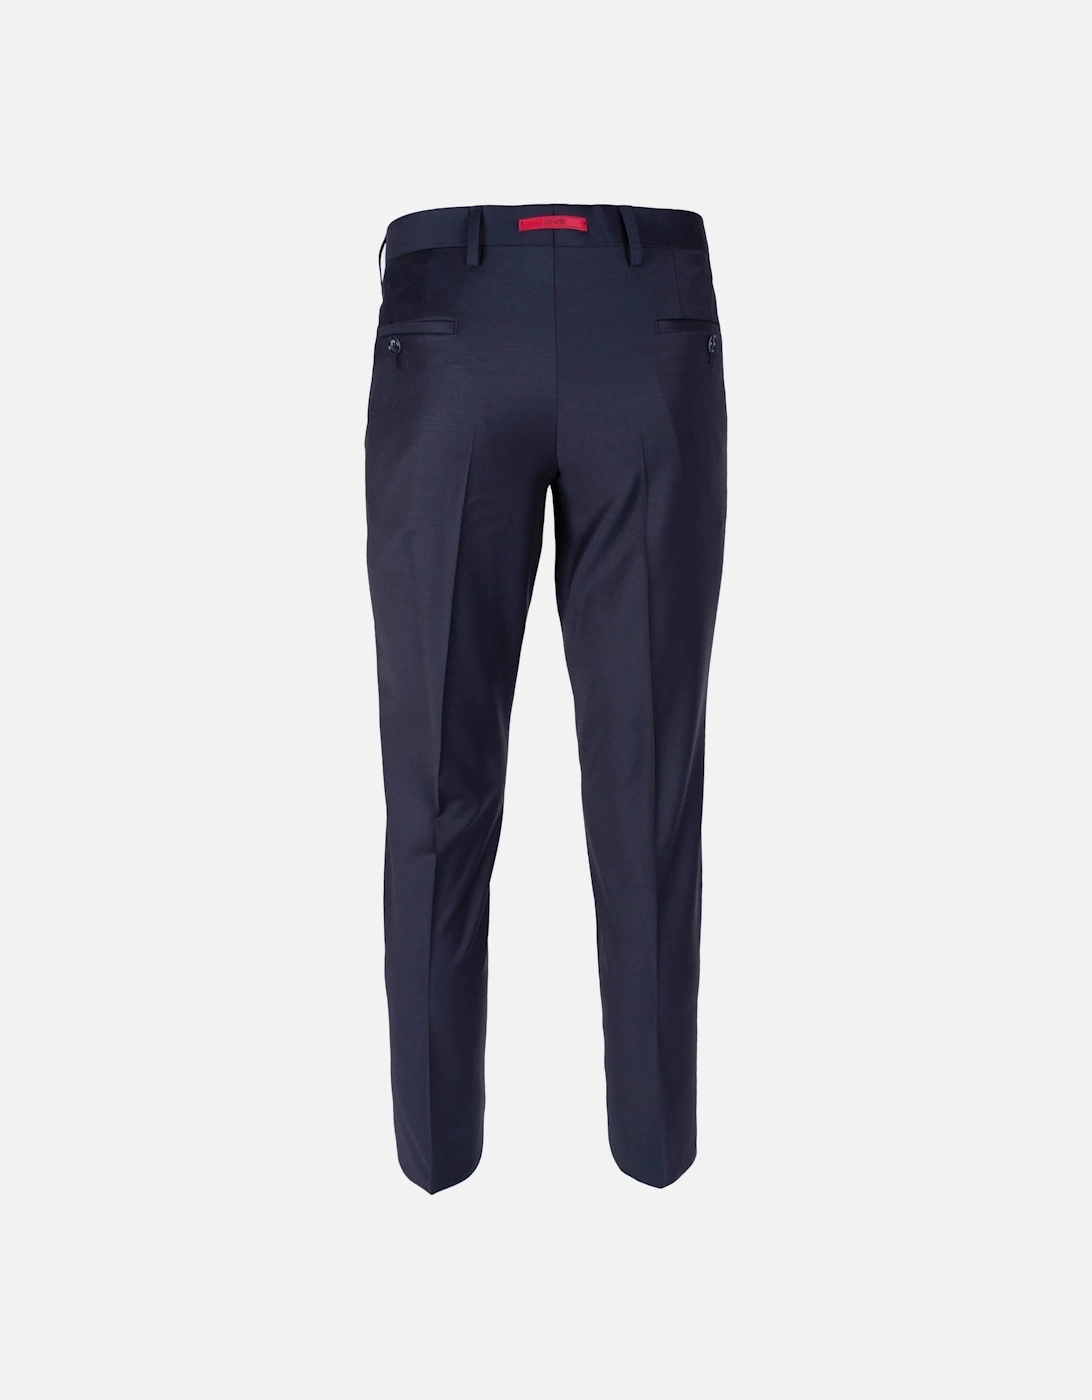 Mens 05038 Trousers (Navy)